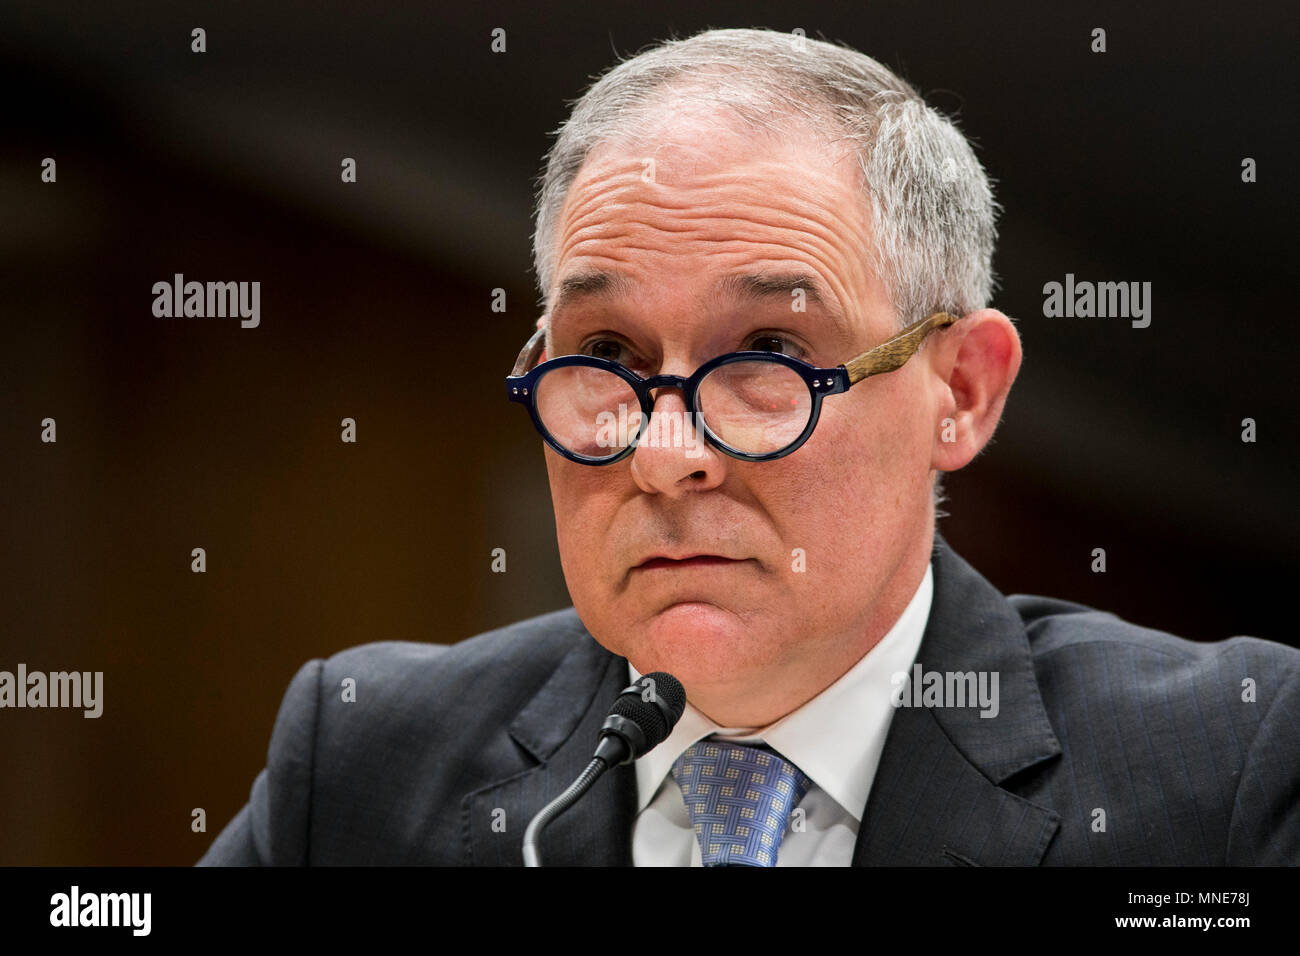 Washington DC, USA. 16th May, 2018. Scott Pruitt, Administrator of the Environmental Protection Agency (EPA), testifies before the Senate Interior, Environment and Related Agencies Appropriations Subcommittee during a hearing on the FY2019 Budget Request for the Environmental Protection Agency in Washington, D.C on May 16, 2018. Credit: Kristoffer Tripplaar/Alamy Live News Stock Photo